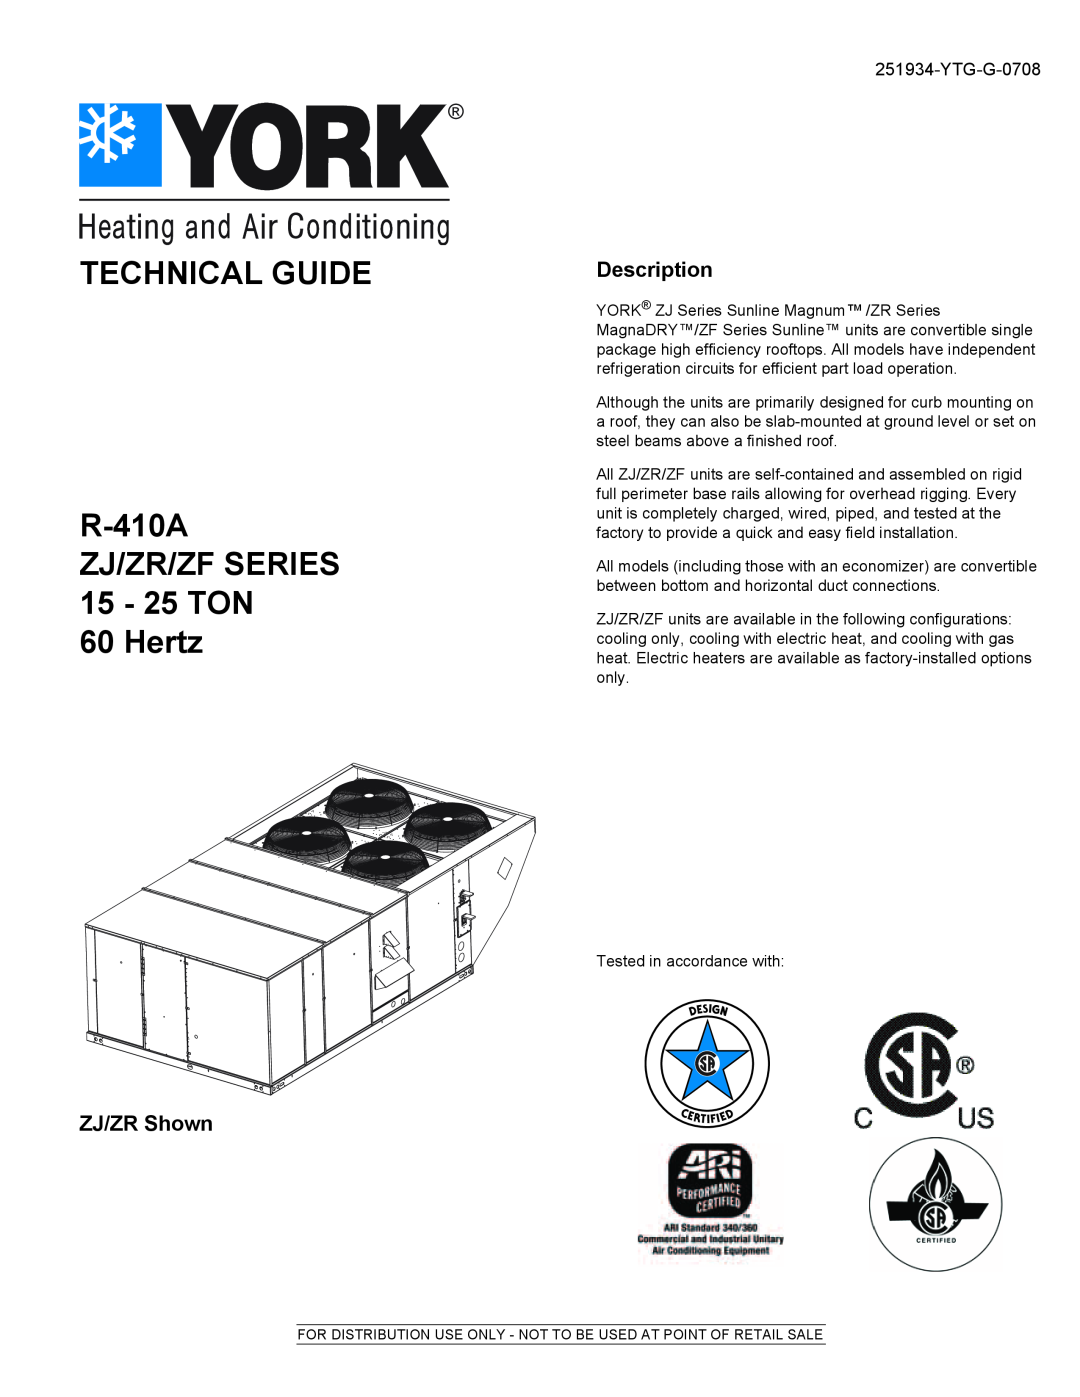 York R-410A dimensions DNX024-048, 2-4Ton, List Of Tables, General, Safety Considerations, DANGER, WARNING or CAUTION 